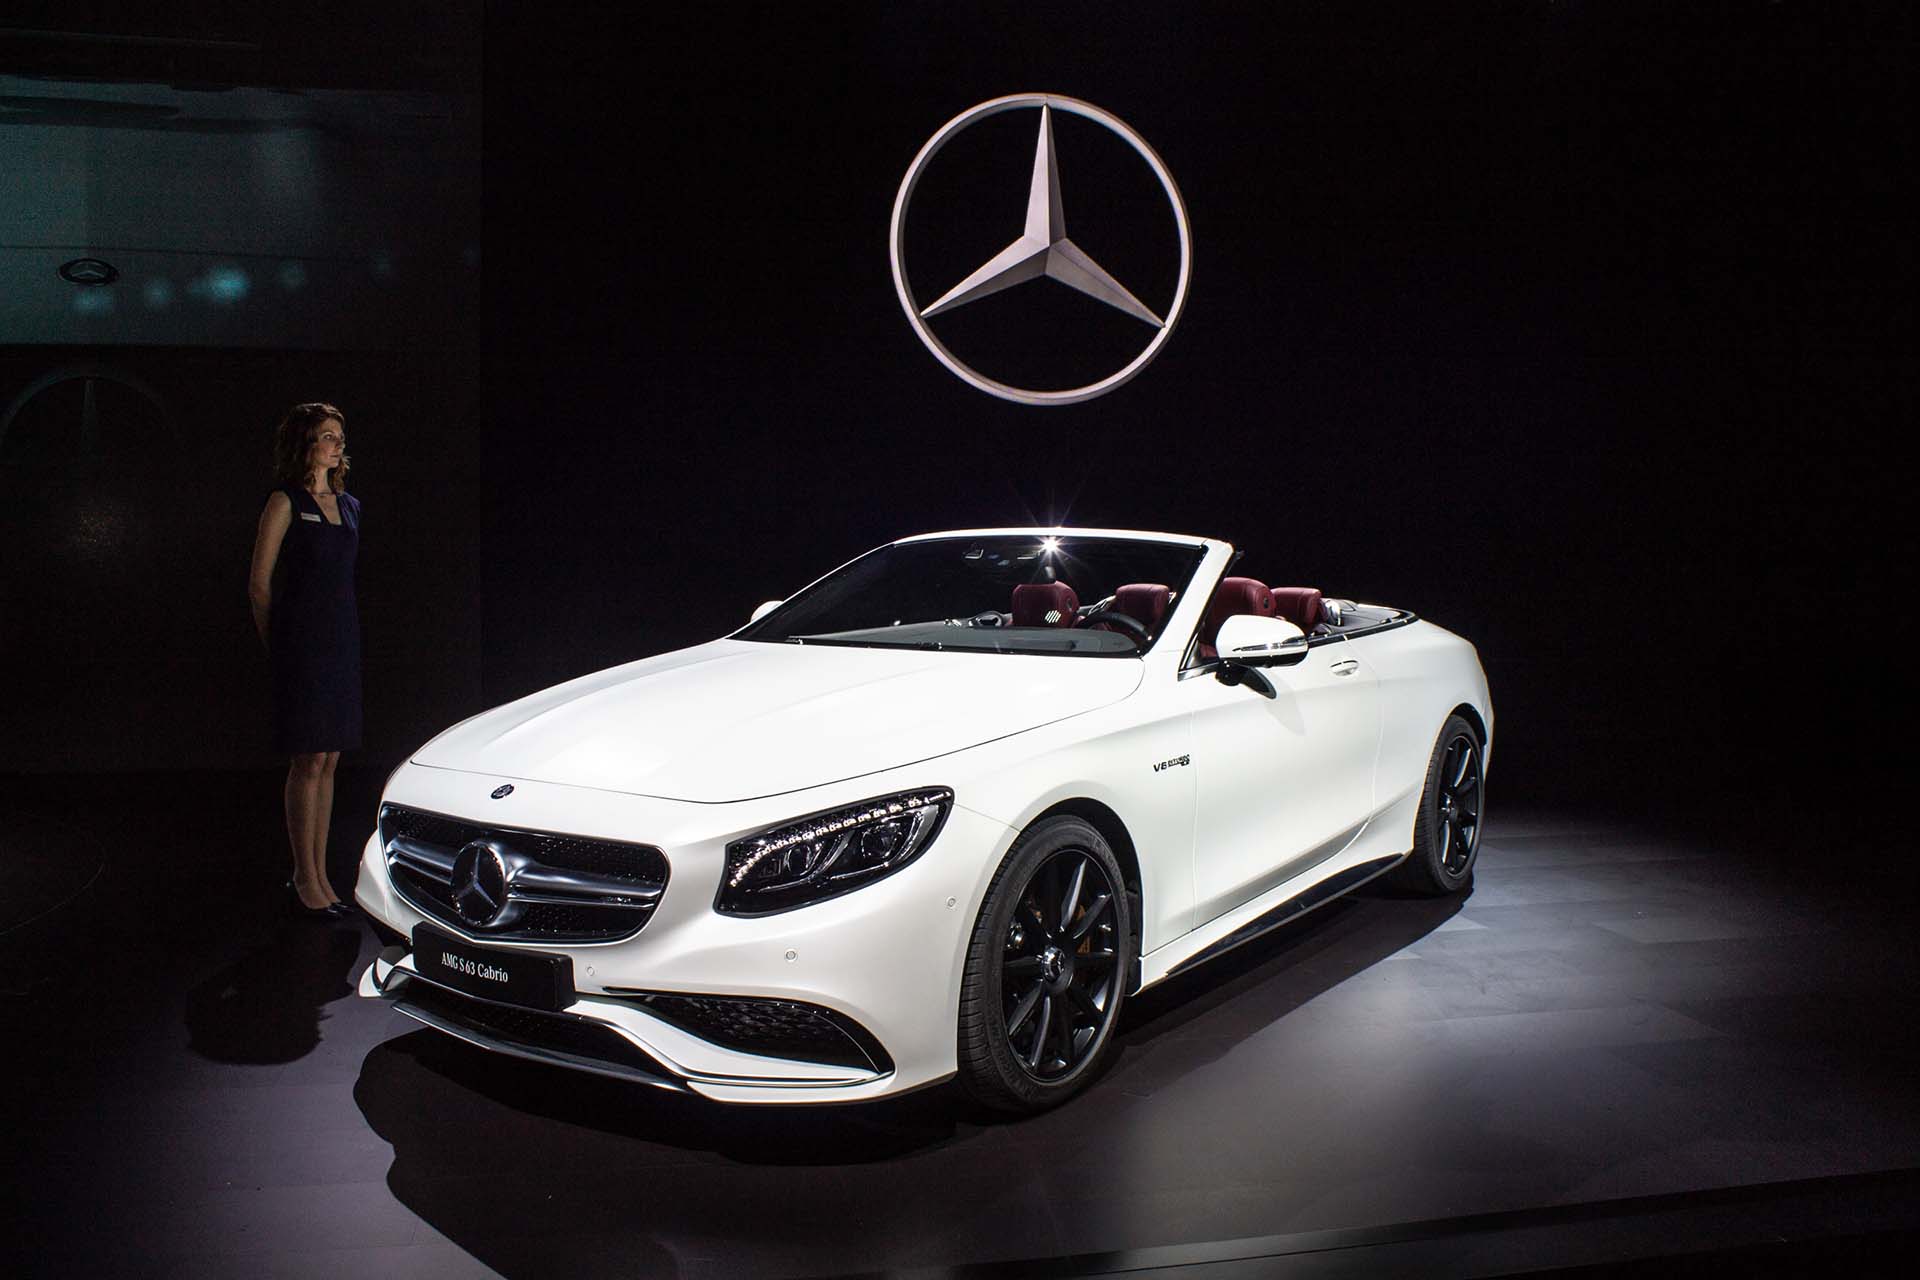 The new SL gets a fresh schnozz, one that gives the car a more cohesive design, and brings it into line with the S-class and redesigned C-Class.